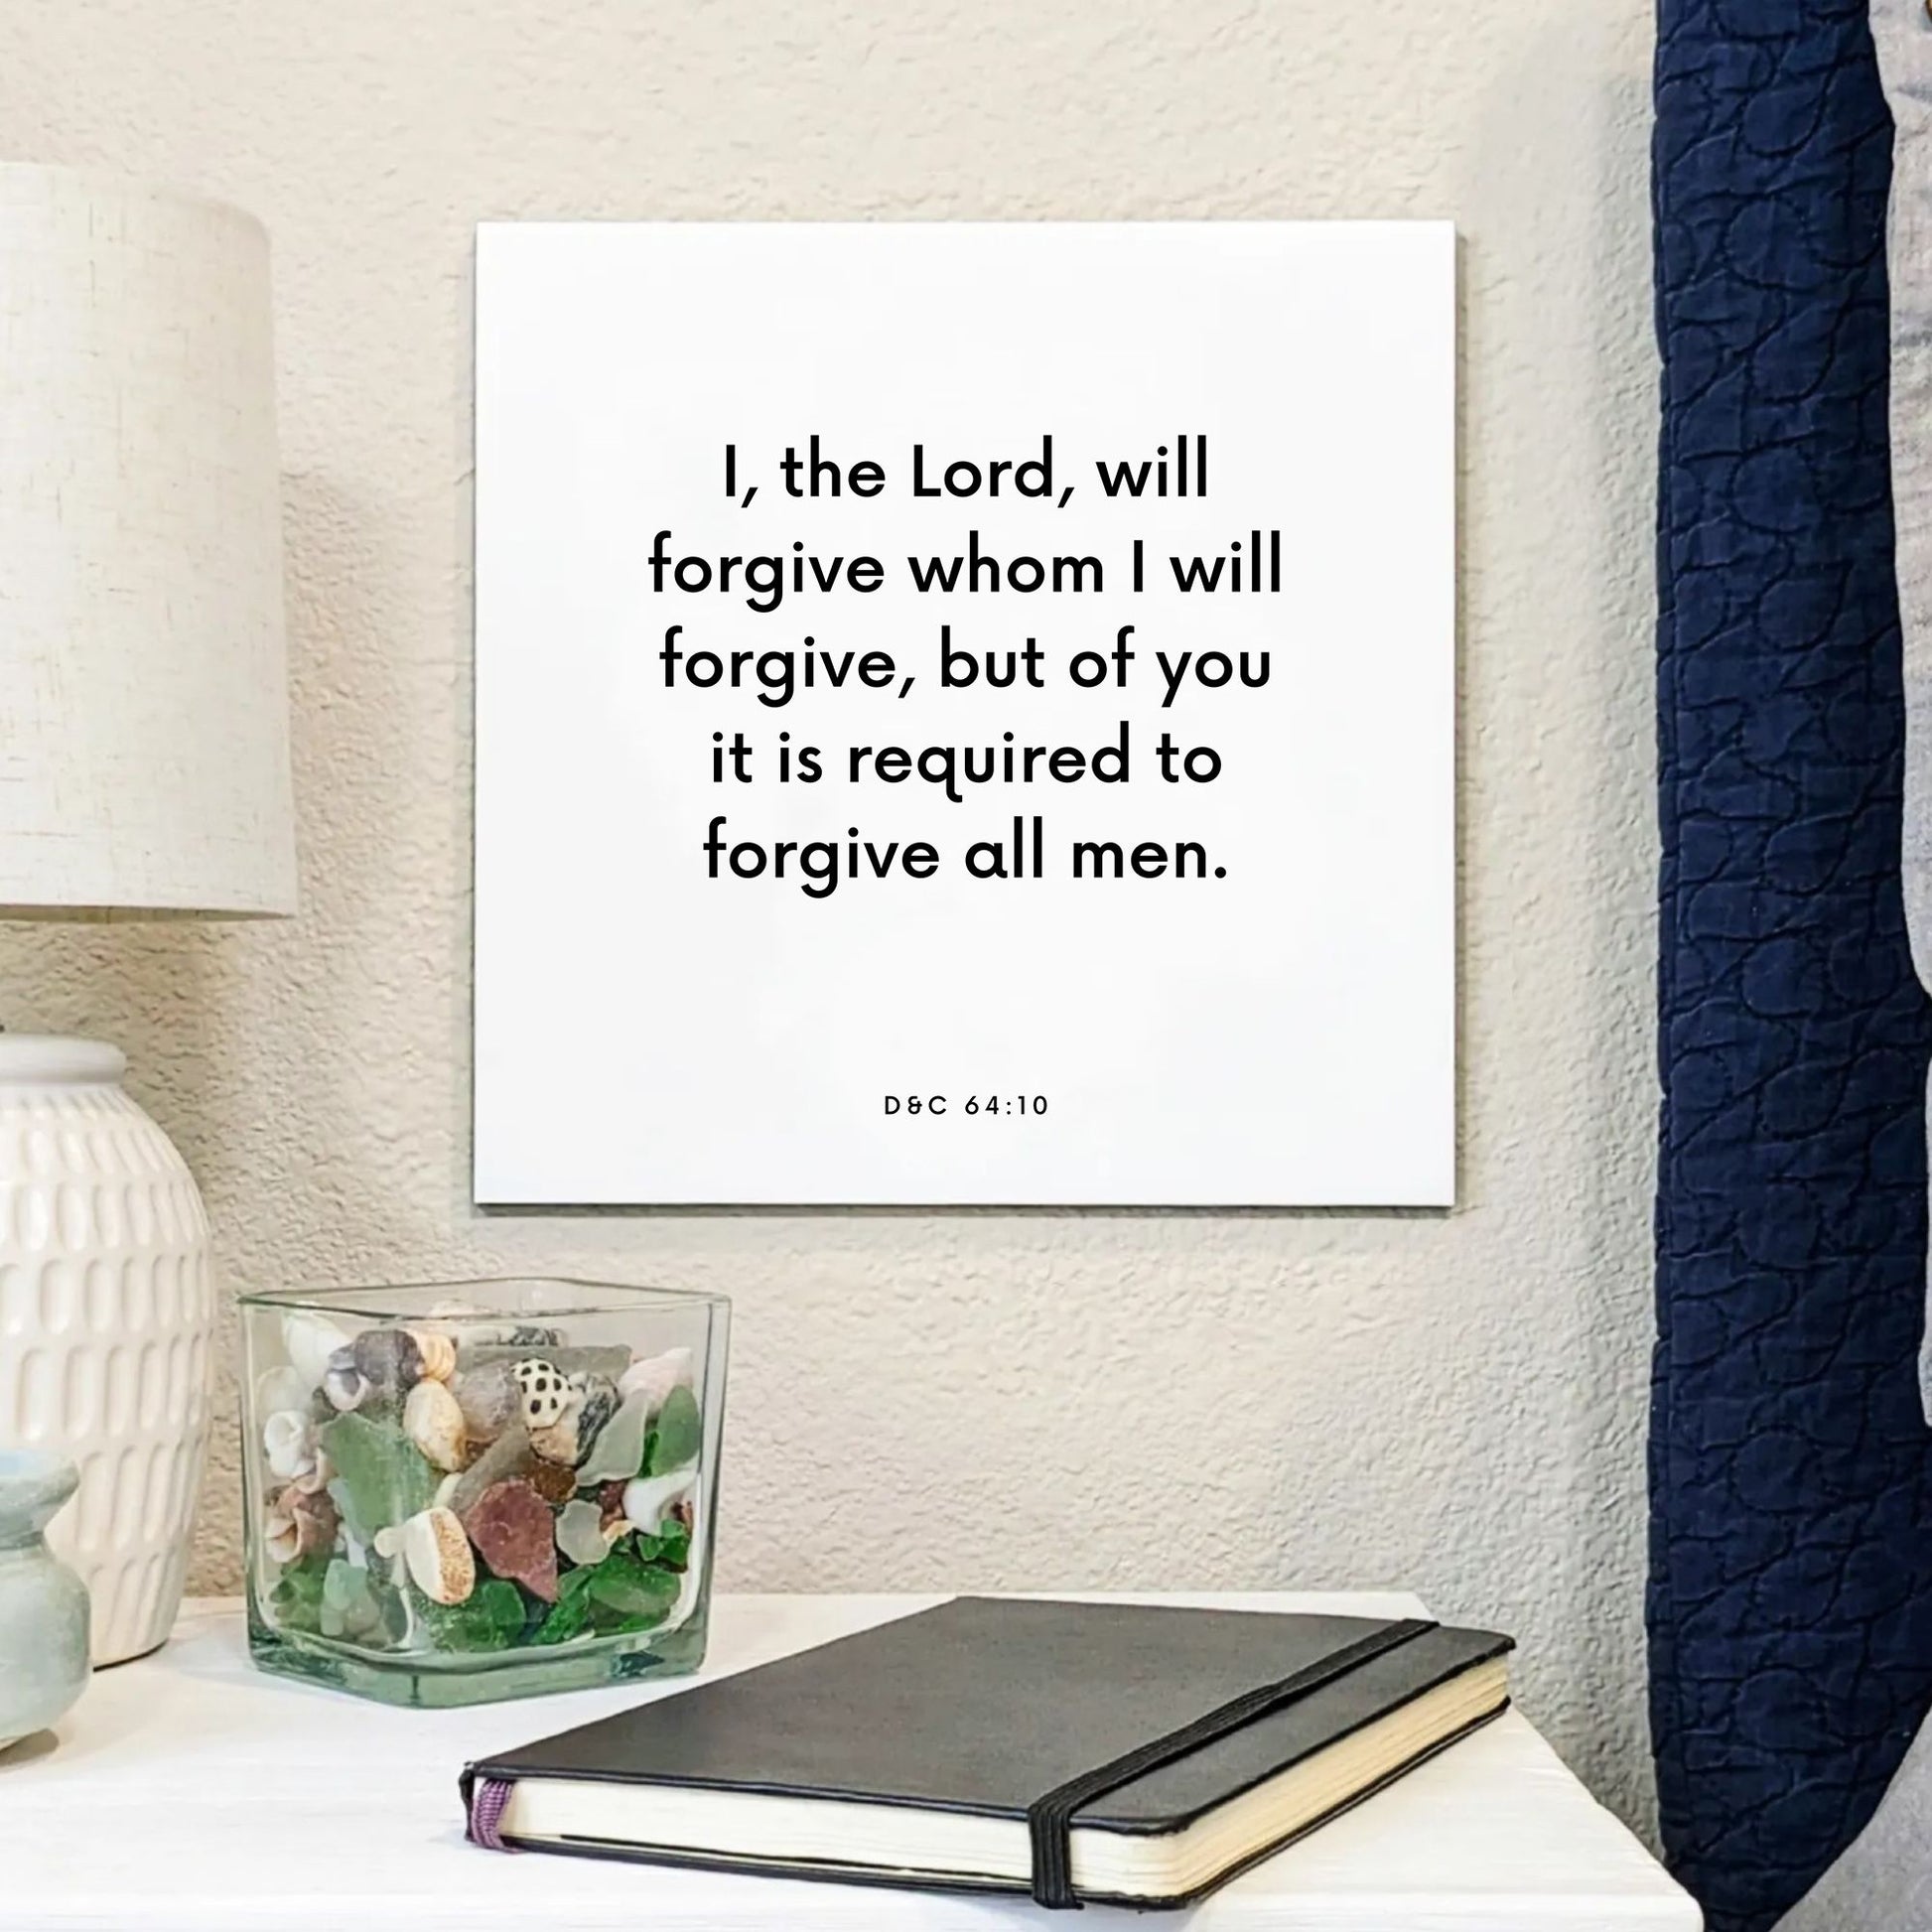 Bedside mouting of the scripture tile for D&C 64:10 - "Of you it is required to forgive all men"